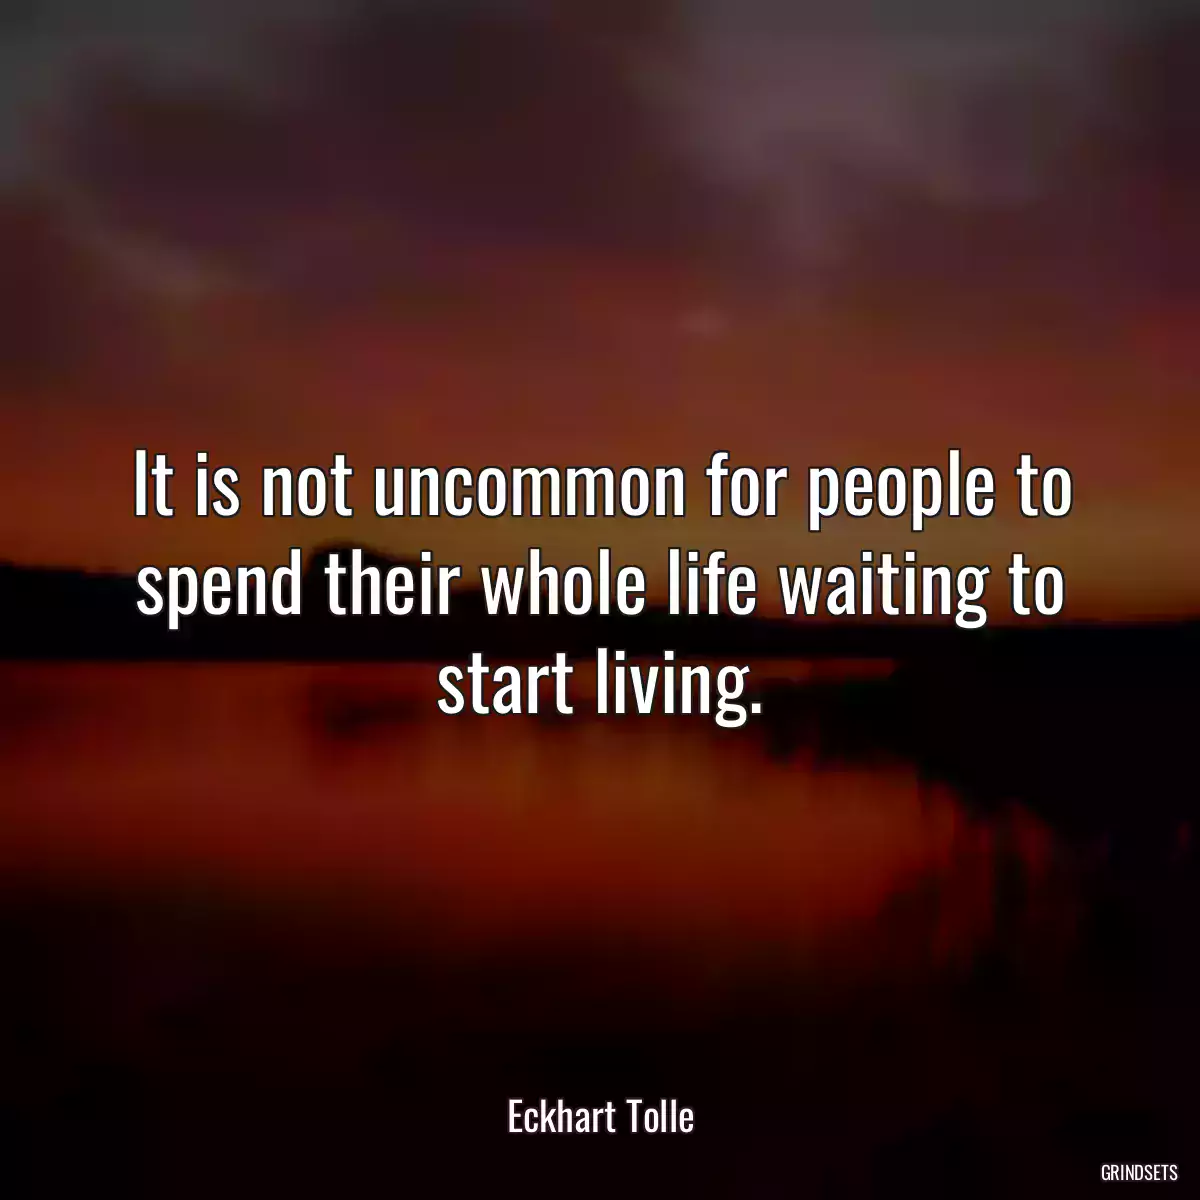 It is not uncommon for people to spend their whole life waiting to start living.